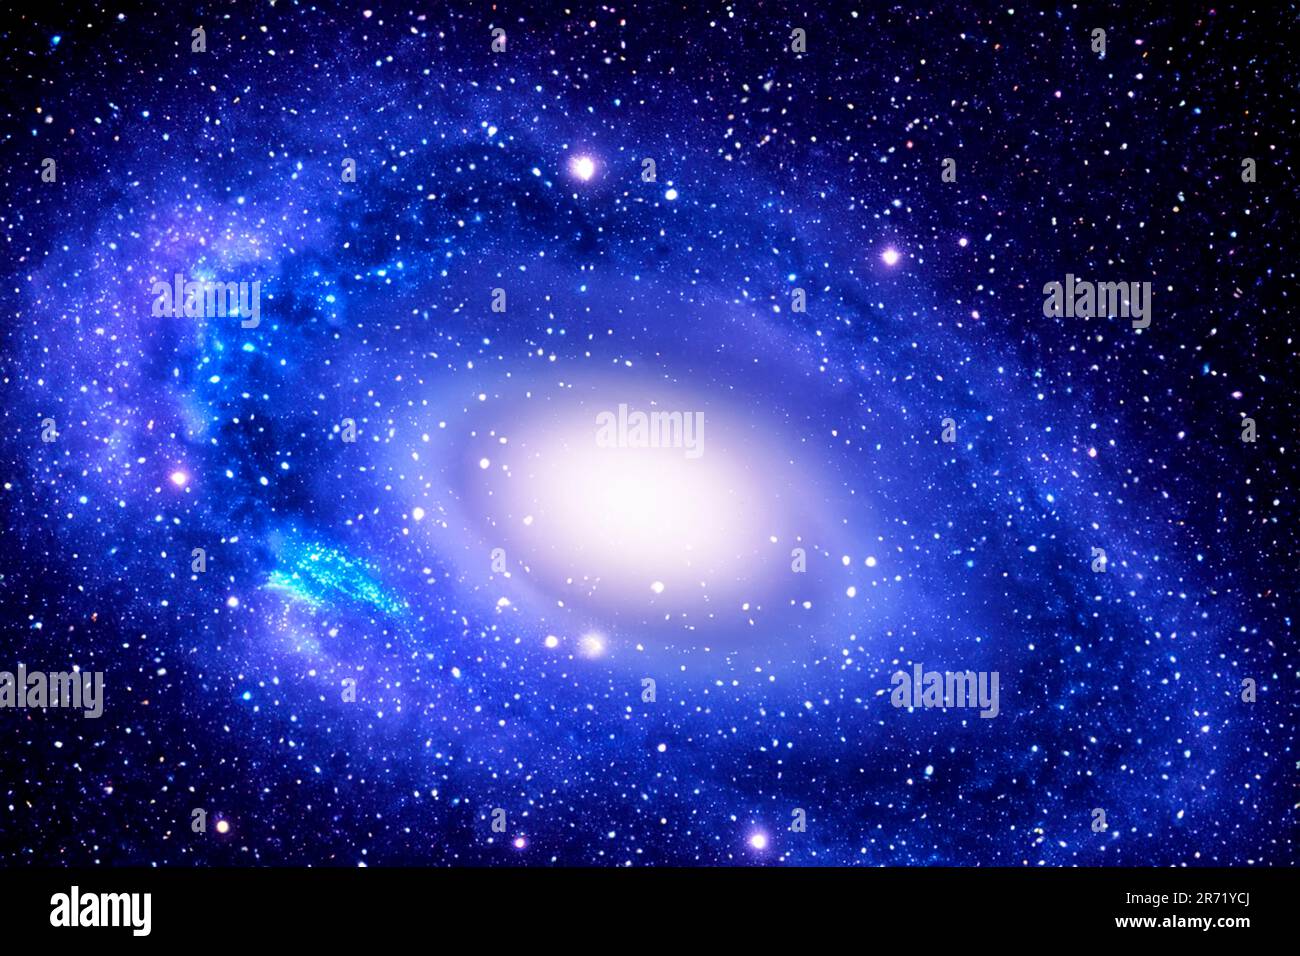 Universe. Black hole. Galaxy. Universe with rotating spiral galaxy in the center. Milky way galaxy with stars and space dust in the universe Stock Photo